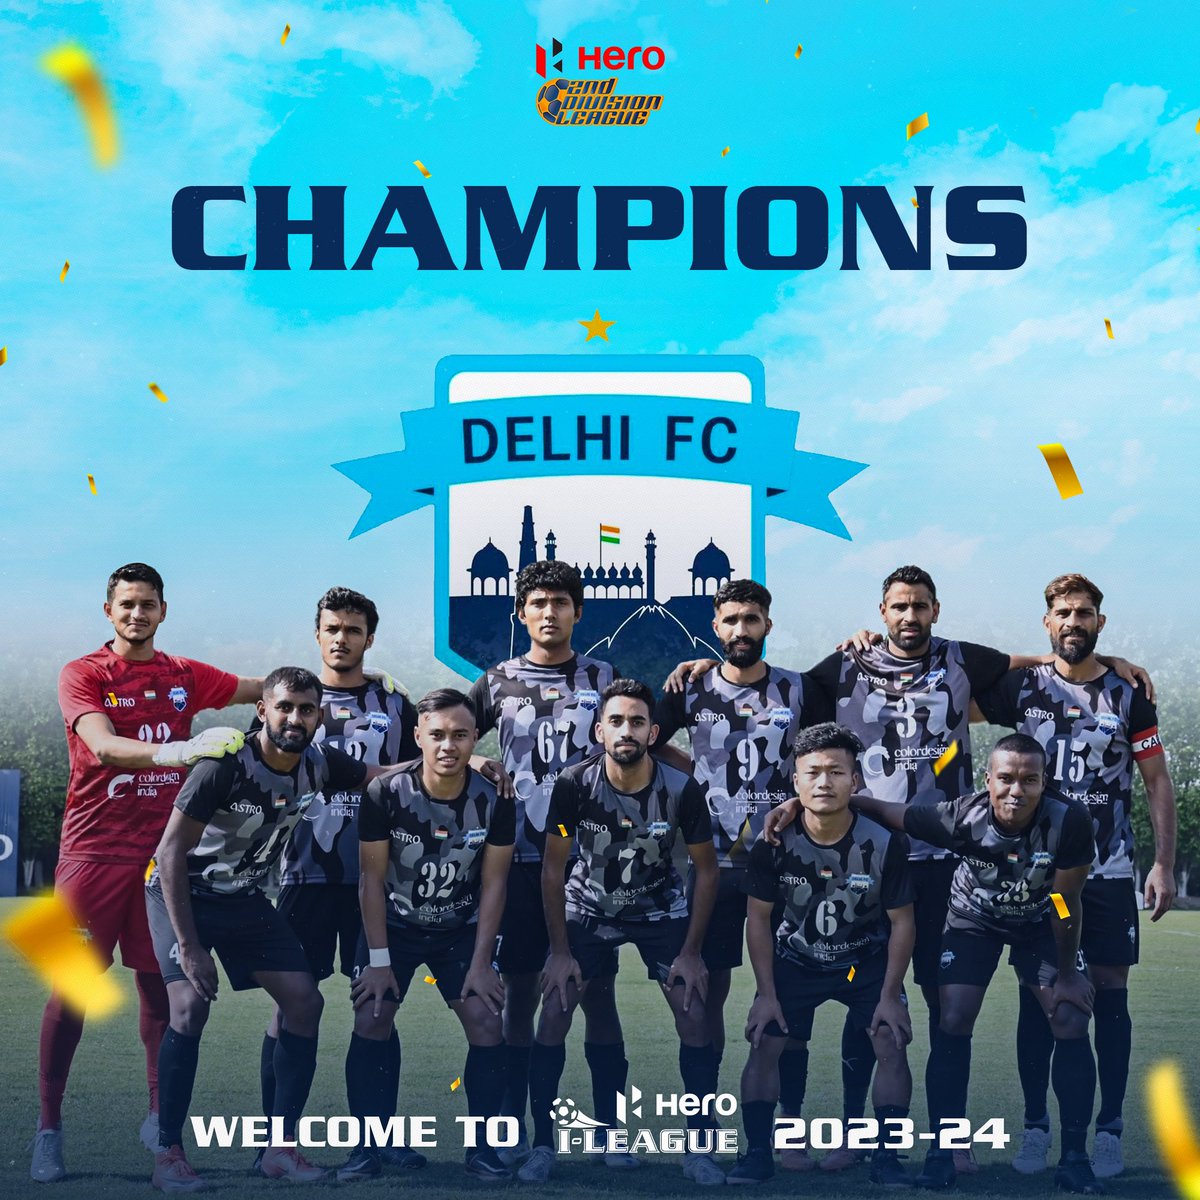 🤩🏆 CHAMPIONS OF HERO 2️⃣ND DIVISION 🏆🤩

#IndianFootball ⚽️ fans, get ready for @Delhi_FC to make their mark in the #HeroILeague 🏆

Delhi FC beat @AmbernathUnited 3️⃣-1️⃣ in their qualification decider 🤯

What an end to the #Hero2ndDiv 🏆 It doesn’t get much better than this 🥵